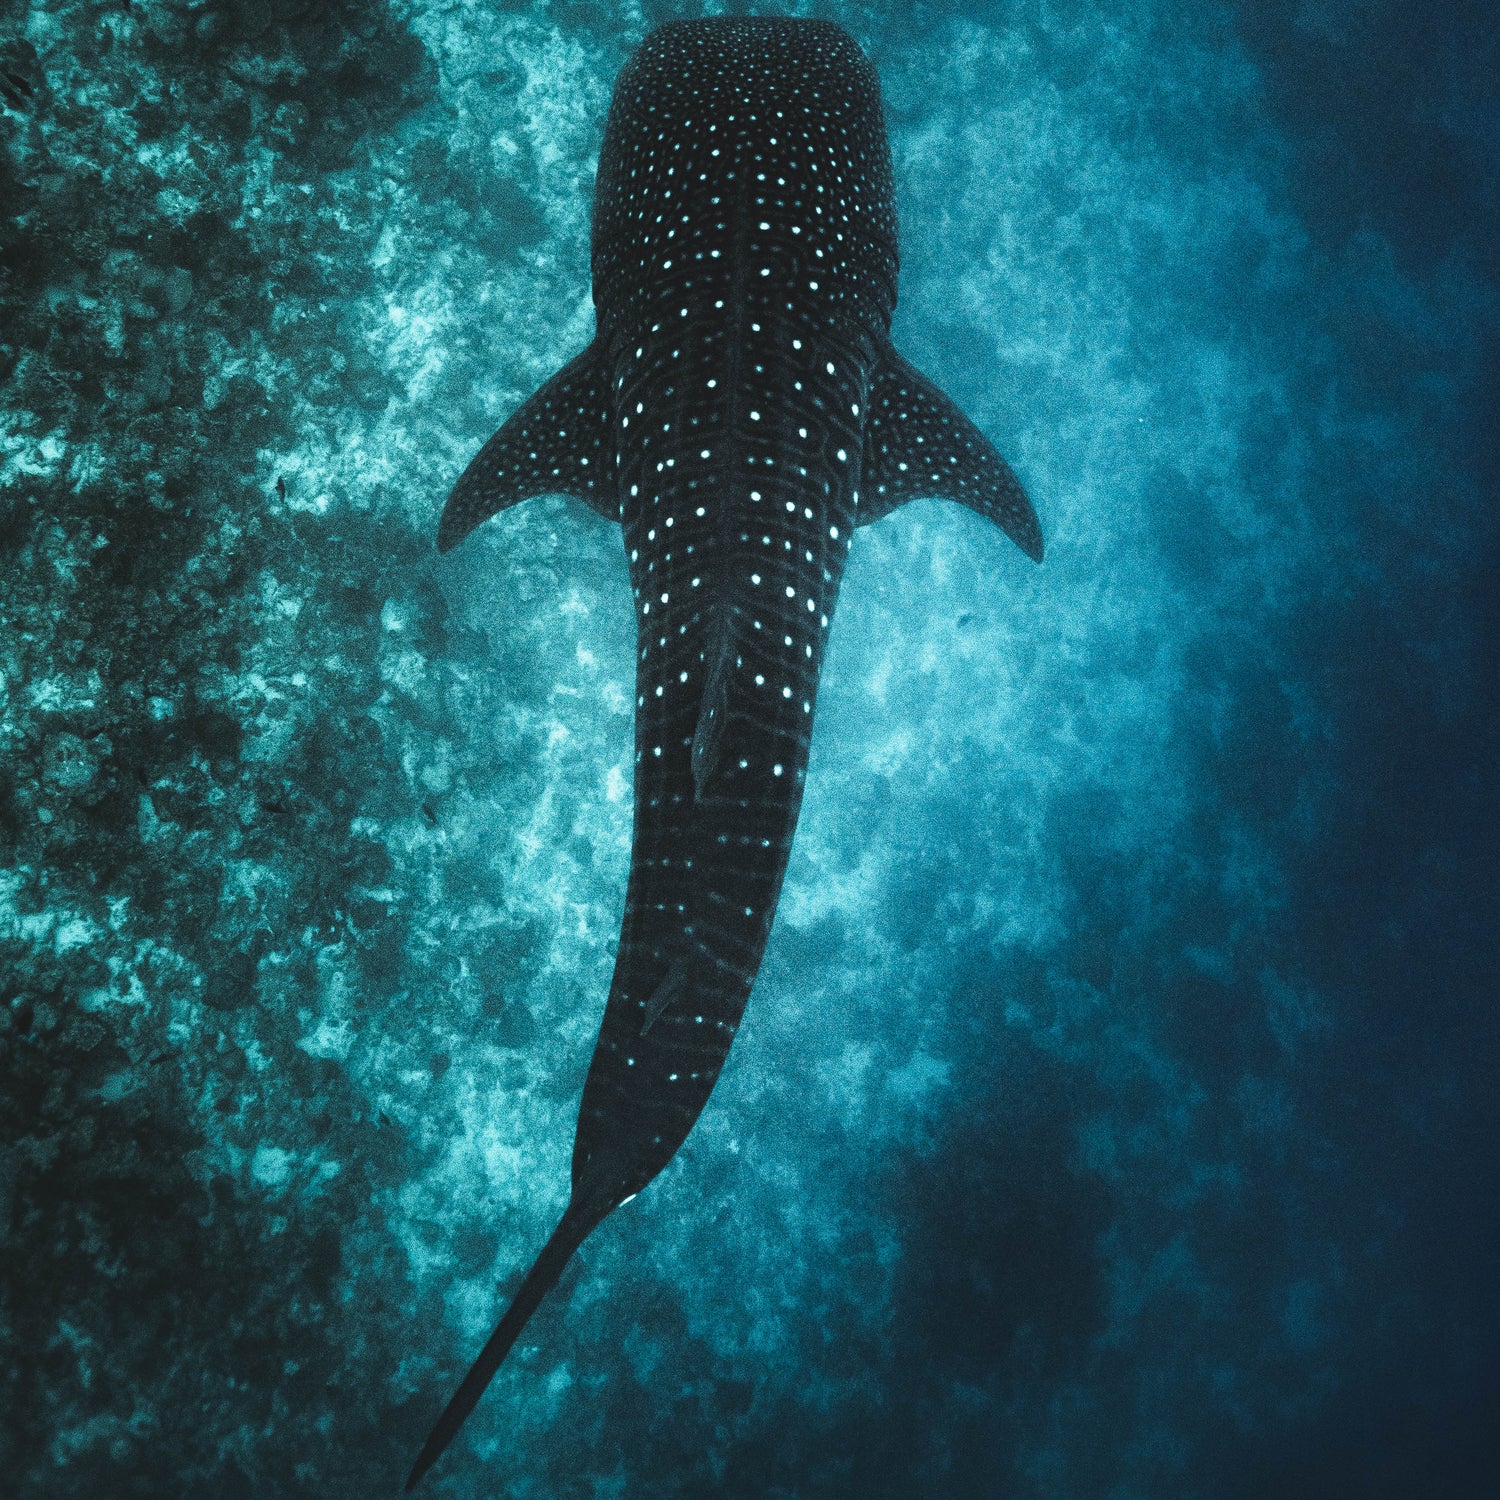 whale shark pictured from above - architectconstructor donates 10% to Mission Blue ocean conservation efforts